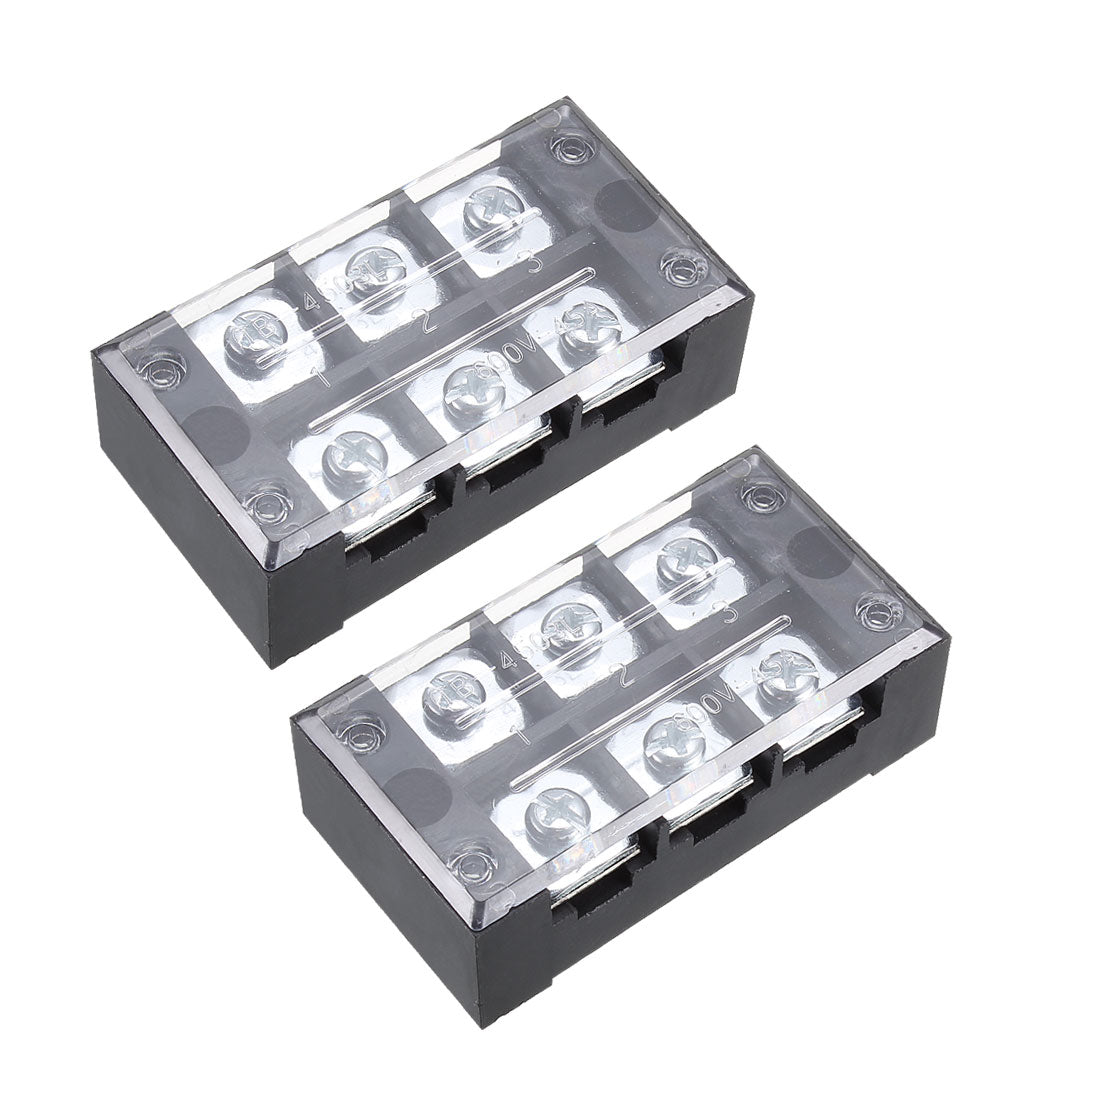 uxcell Uxcell 2 Pcs 3 Positions Dual Rows 600V 45A Cable Barrier Block Terminal Strip TB-4503L